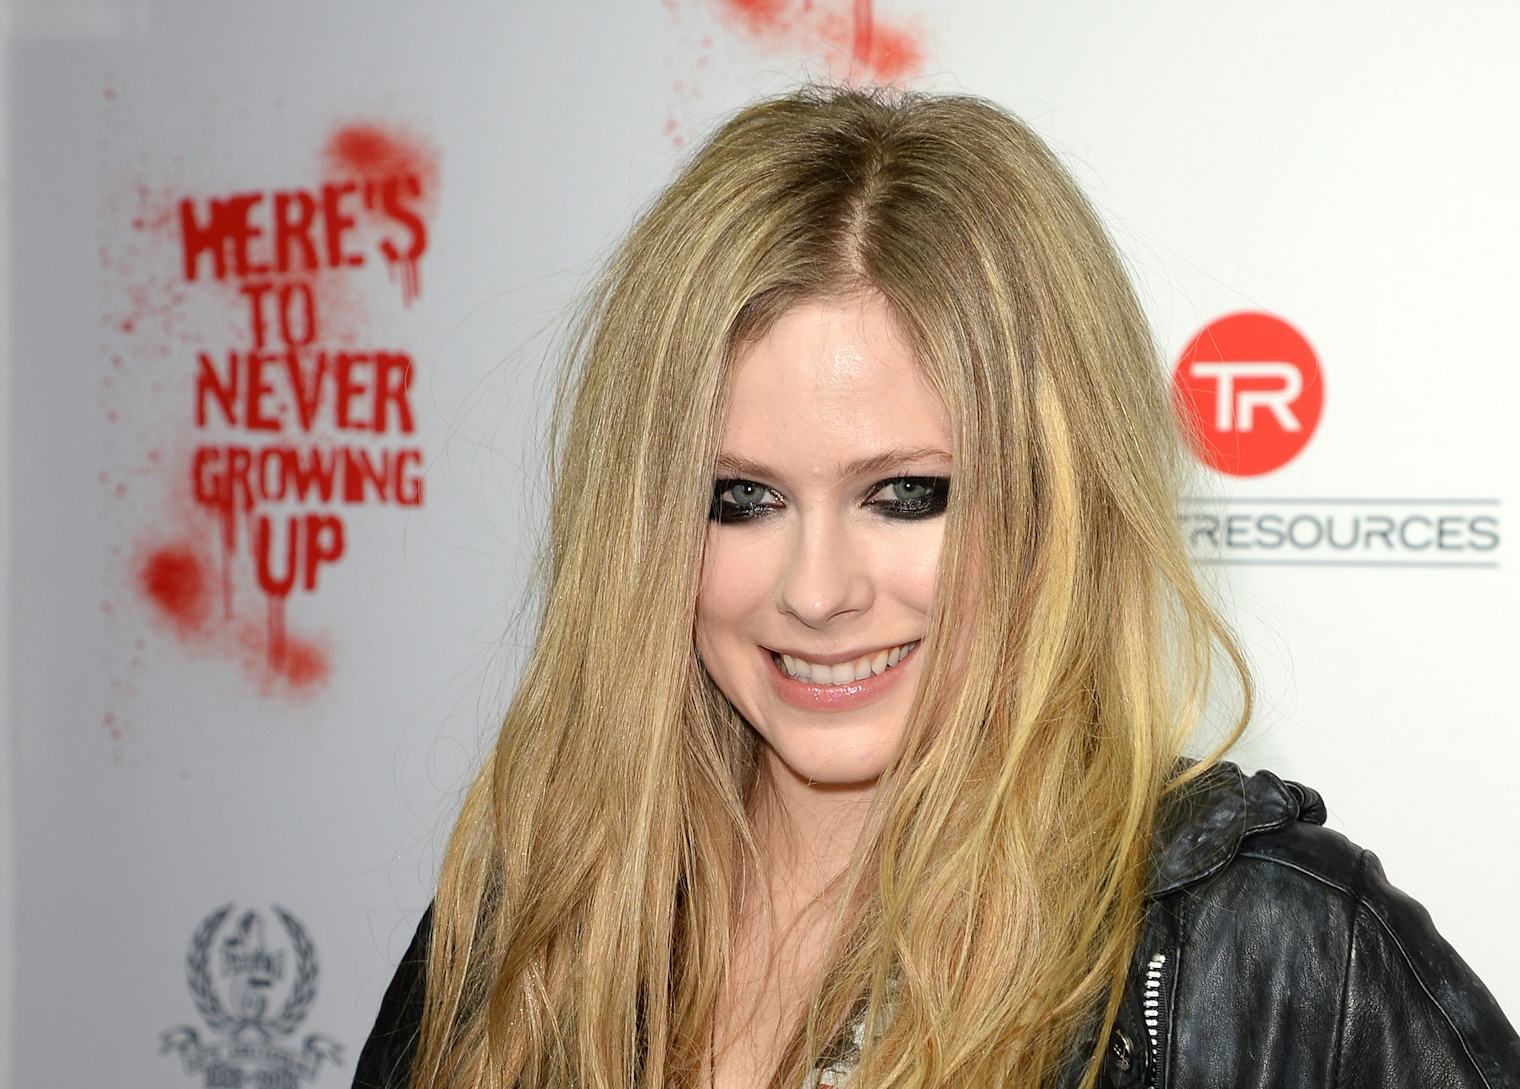 11 Avril Lavigne Trends That We All Tried To Copy In The Early 2000s